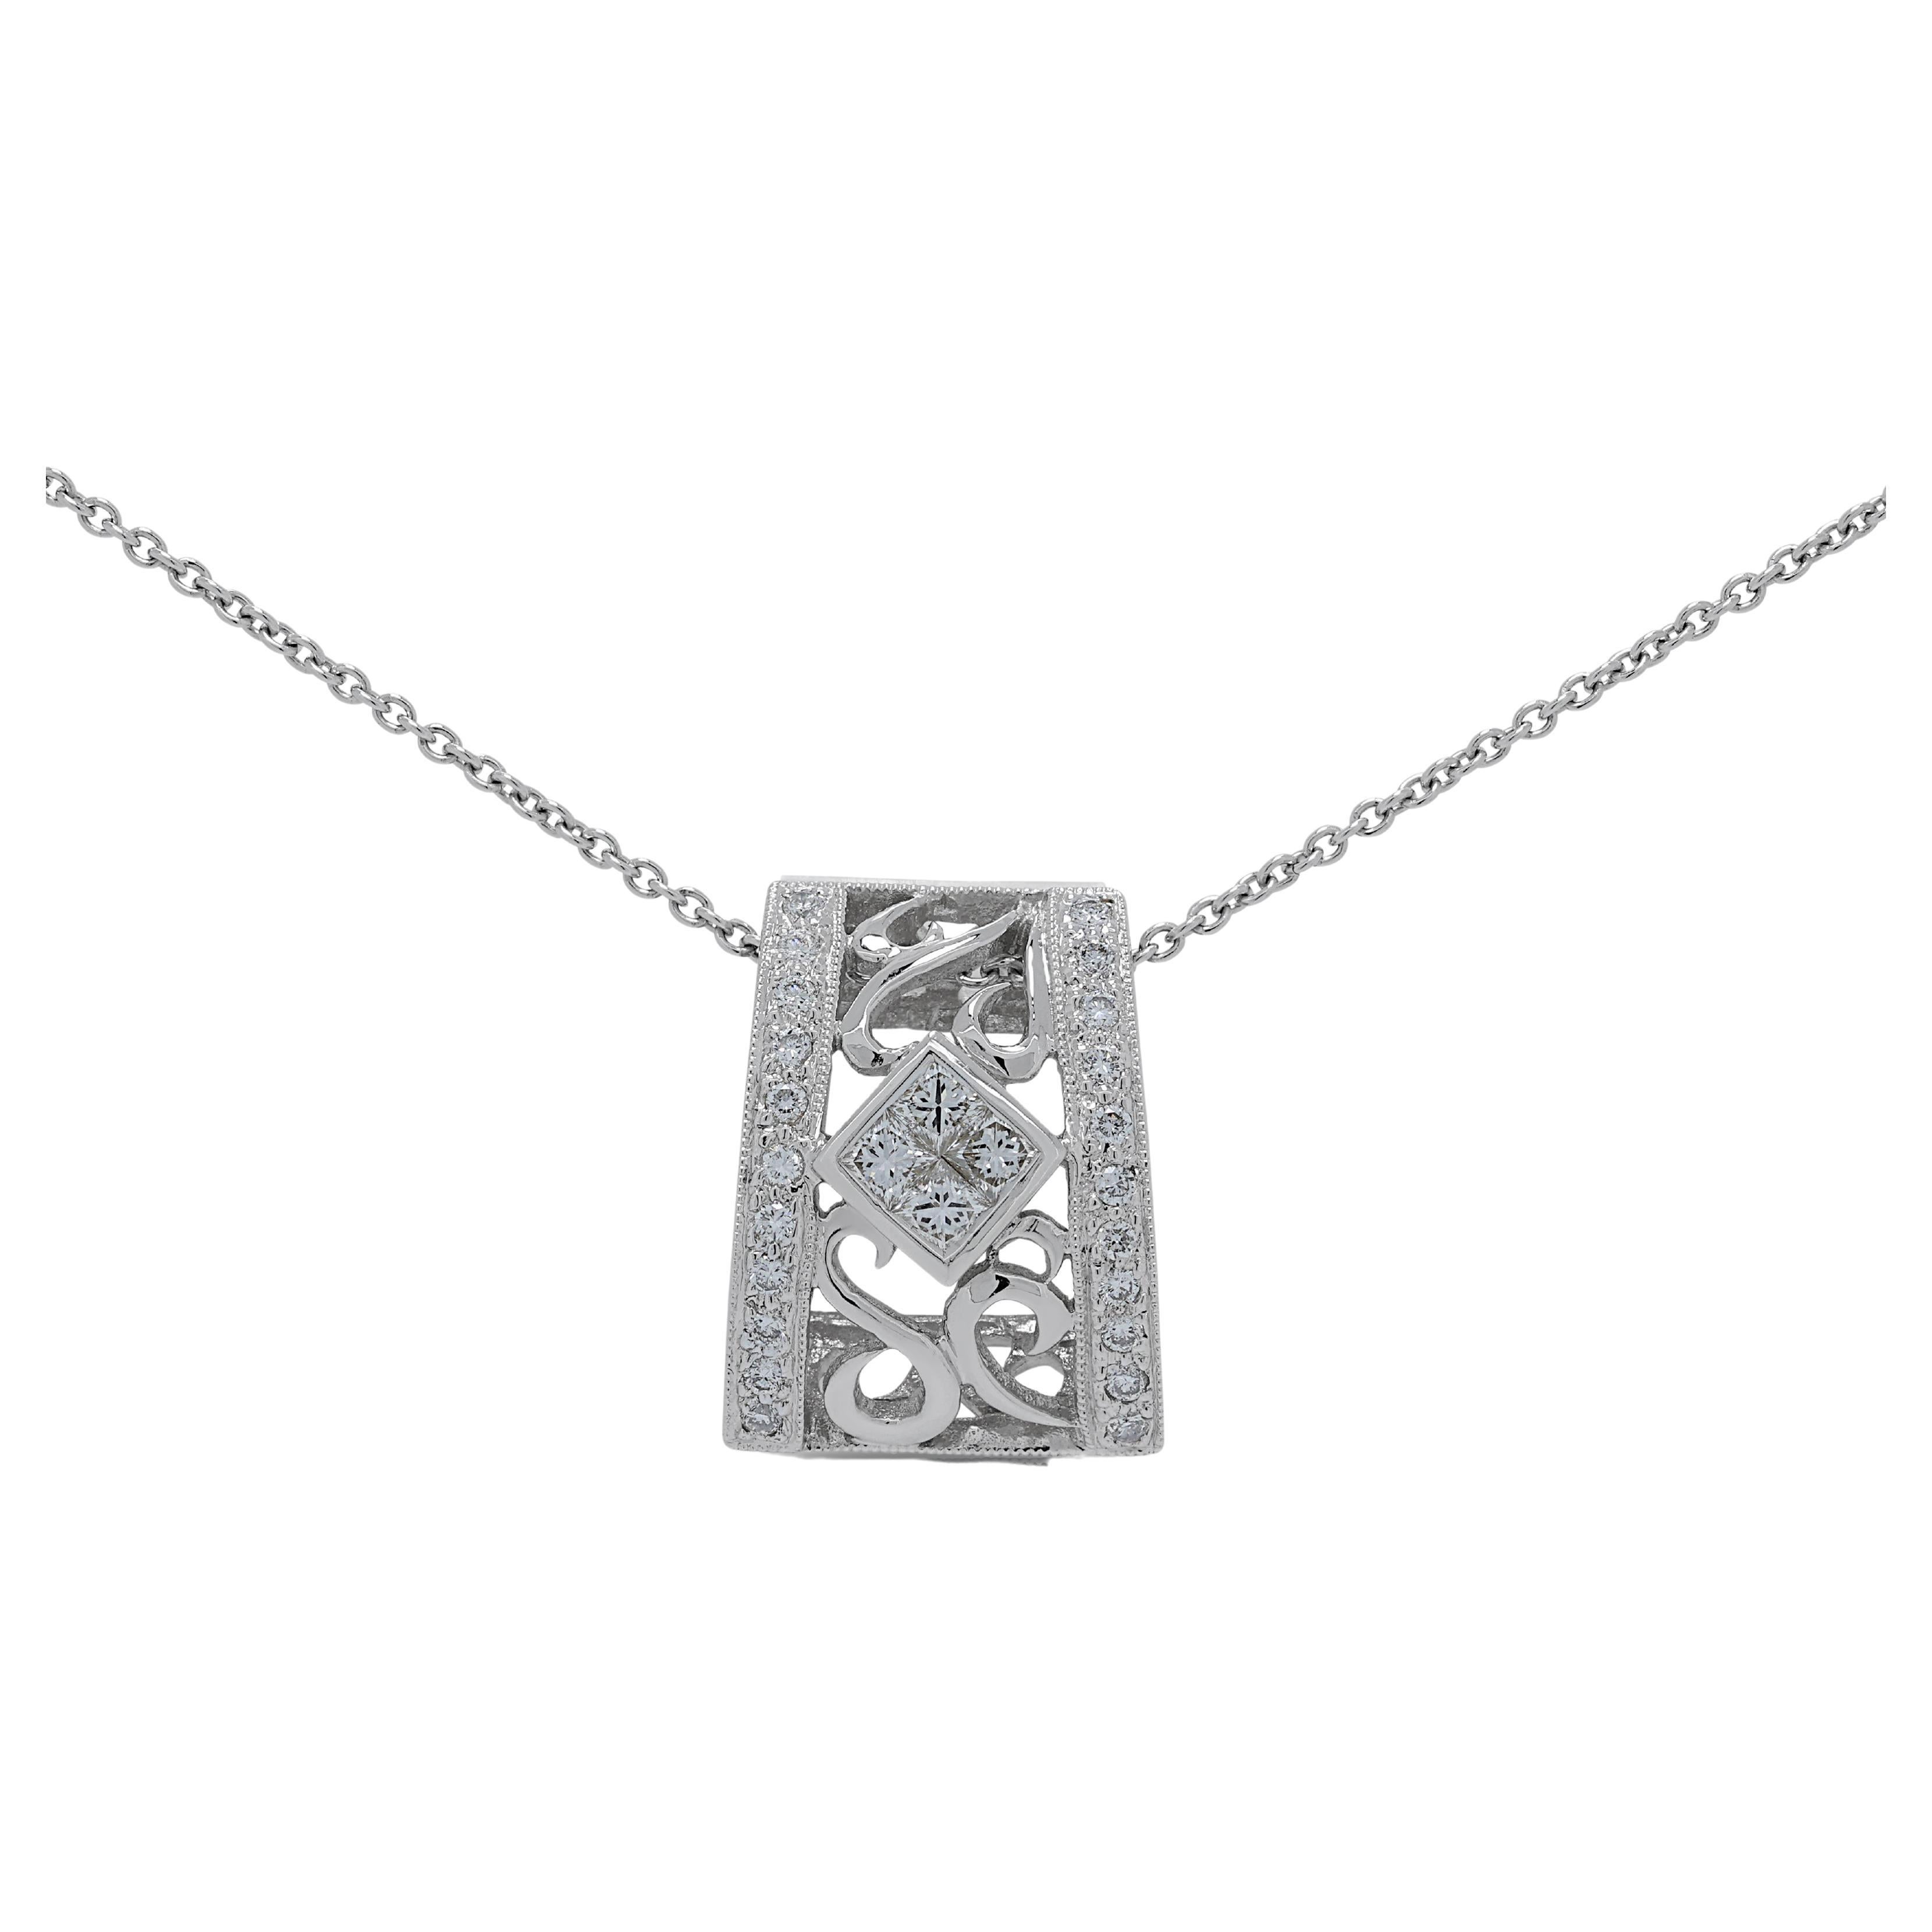 Luminous 0.30ct Diamonds Pendant in 18K White Gold - (Chain not Included) For Sale